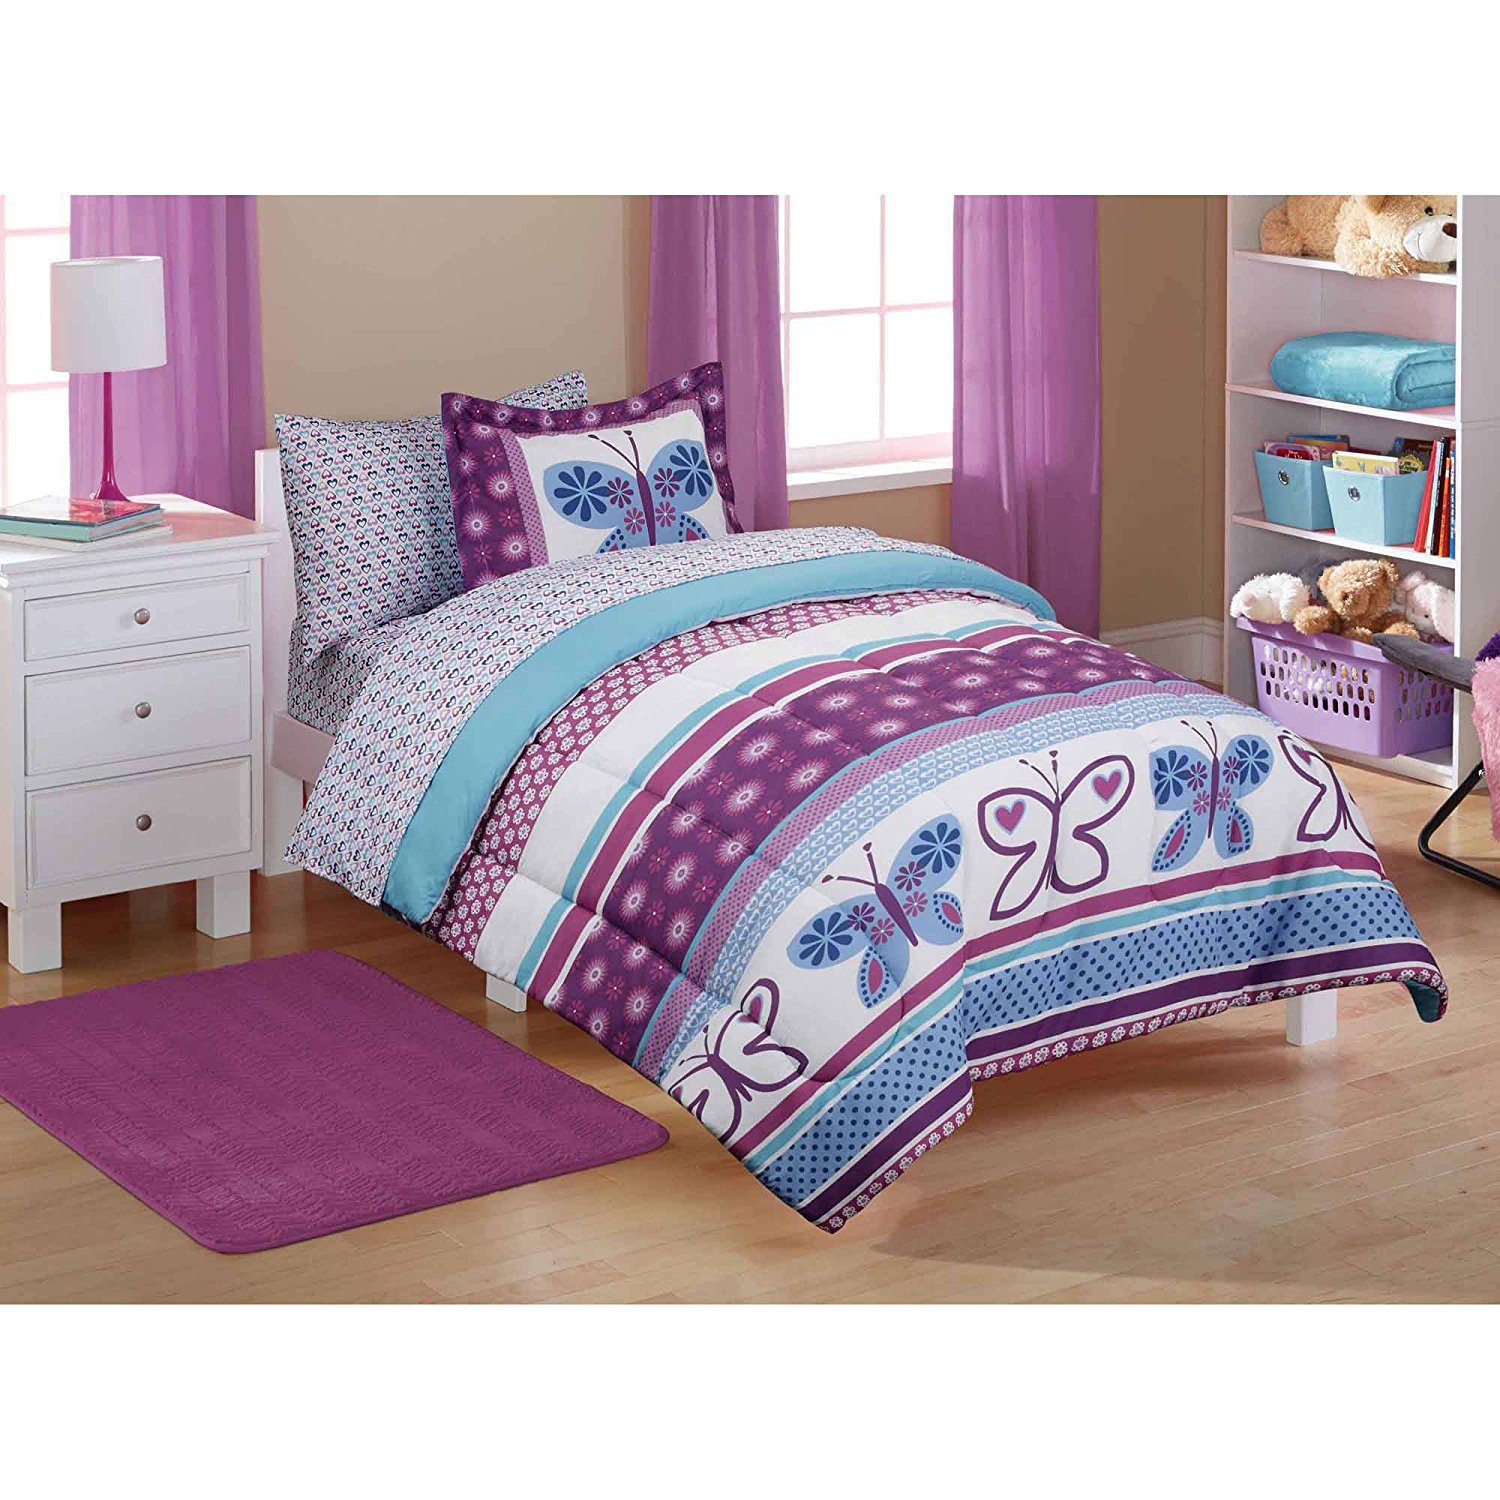 5pc Girl Purple Blue Butterfly Polka Dot Twin Comforter Set (5pc Bed in a bag)